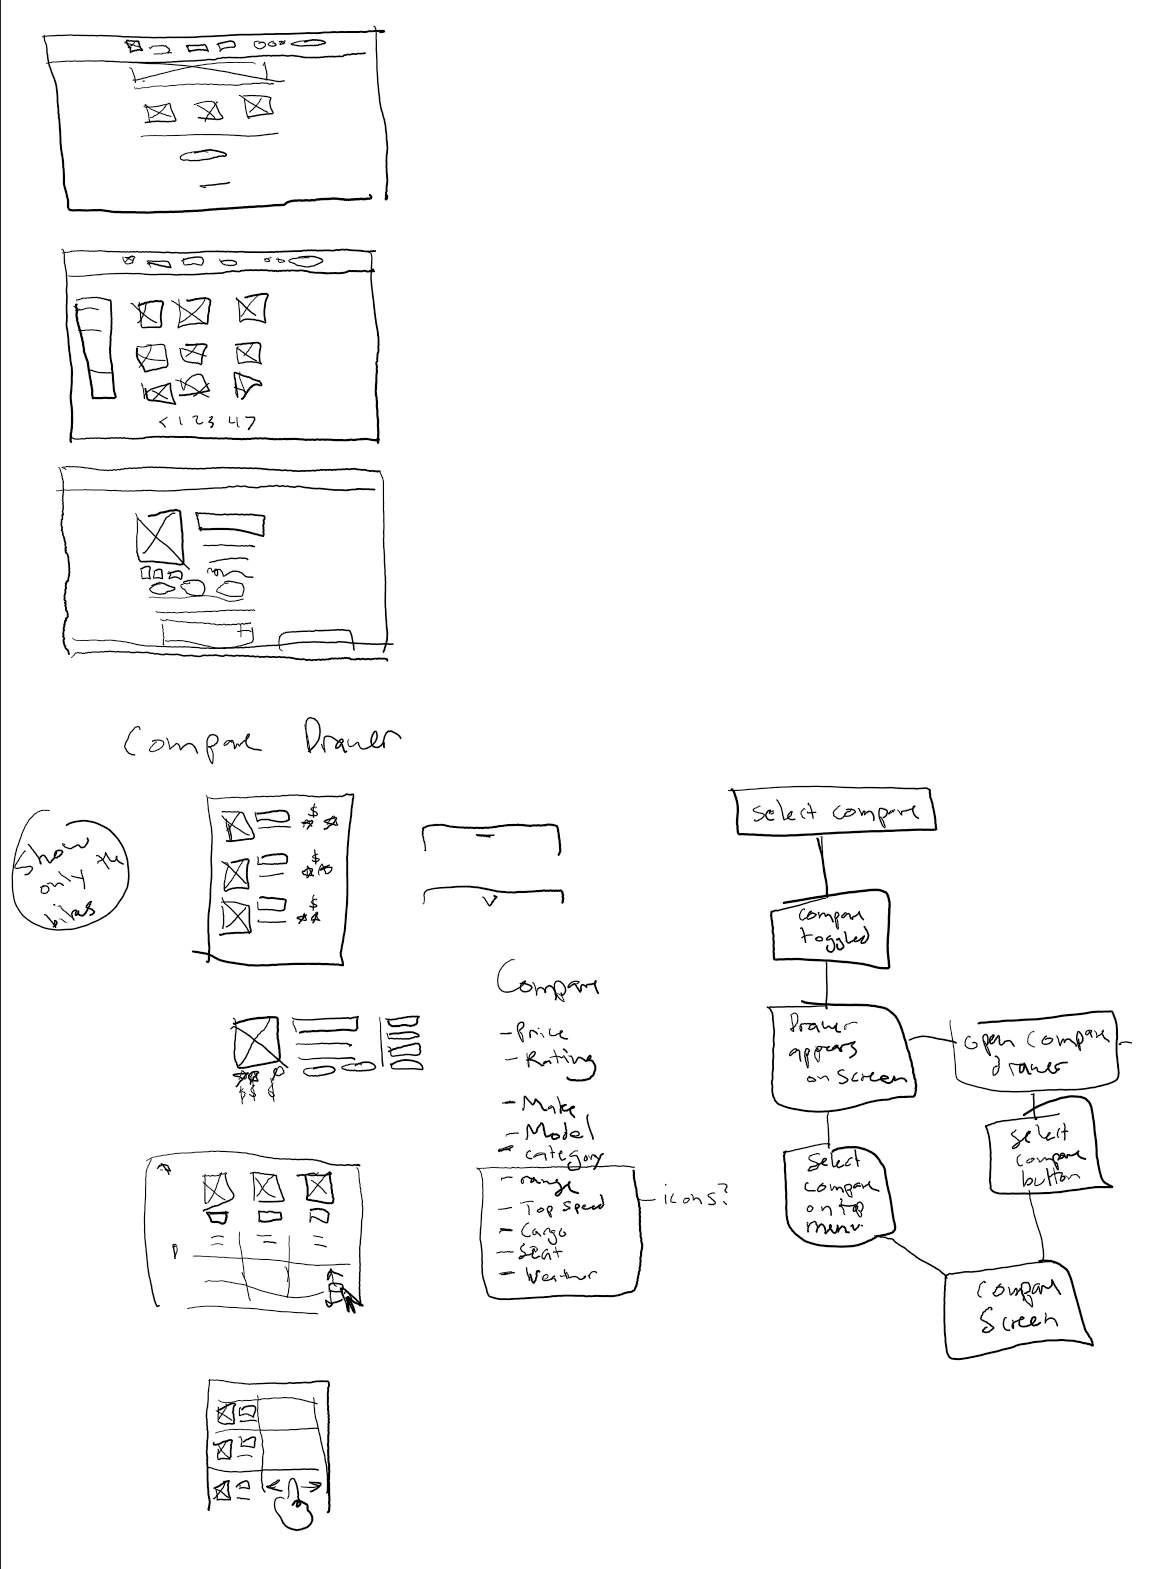 Sketches-and-Ideation-Compare-Drawer